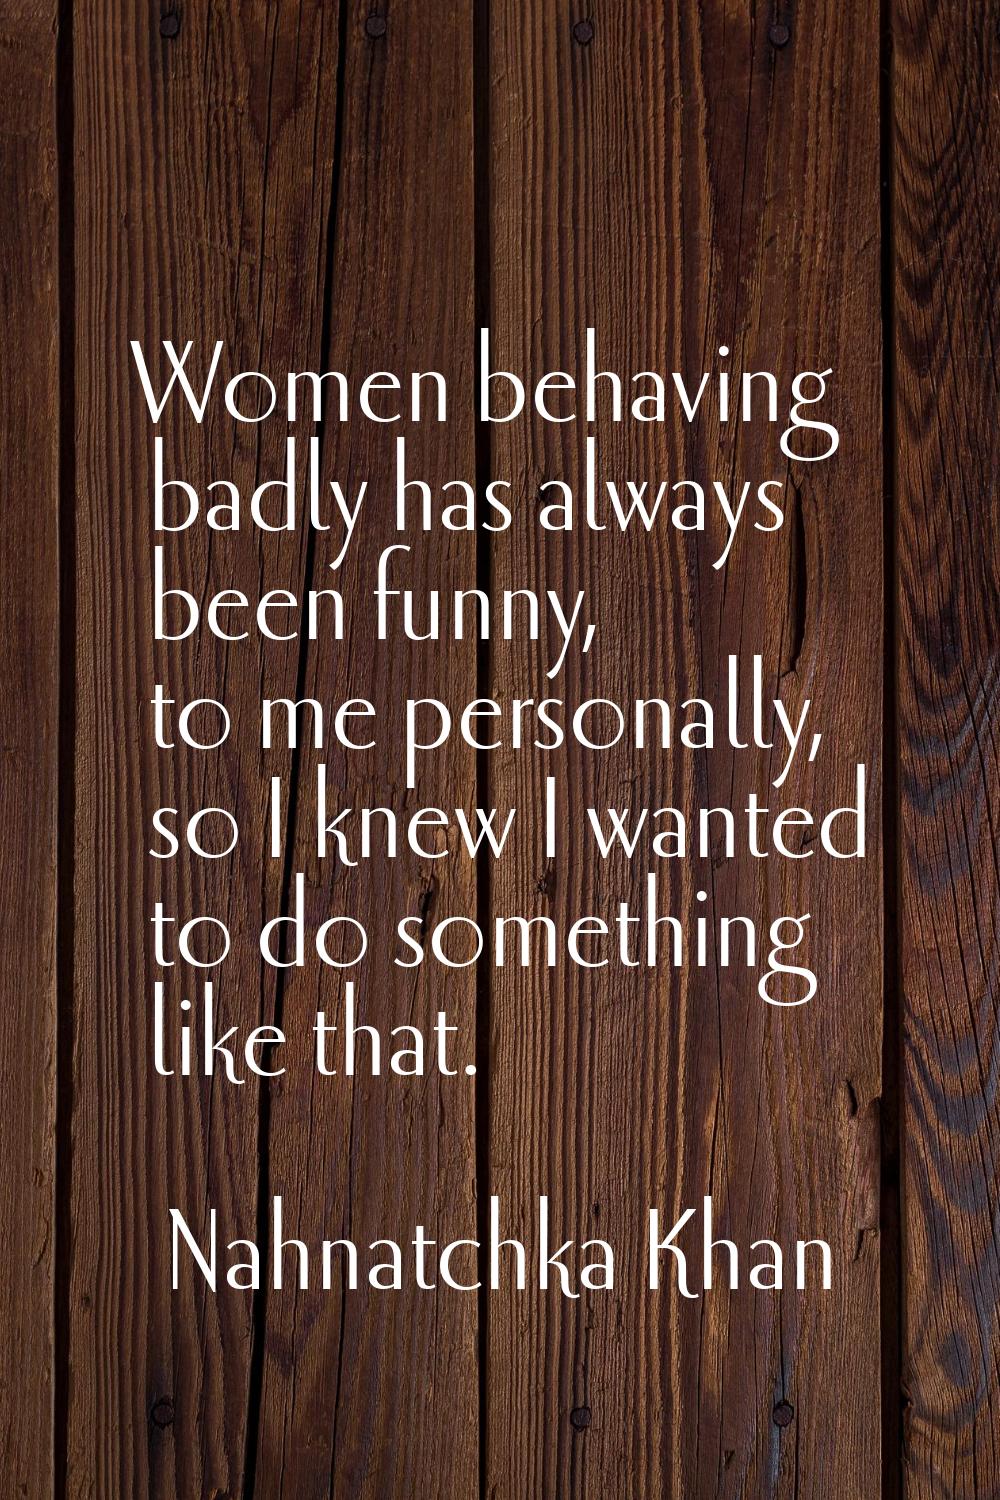 Women behaving badly has always been funny, to me personally, so I knew I wanted to do something li